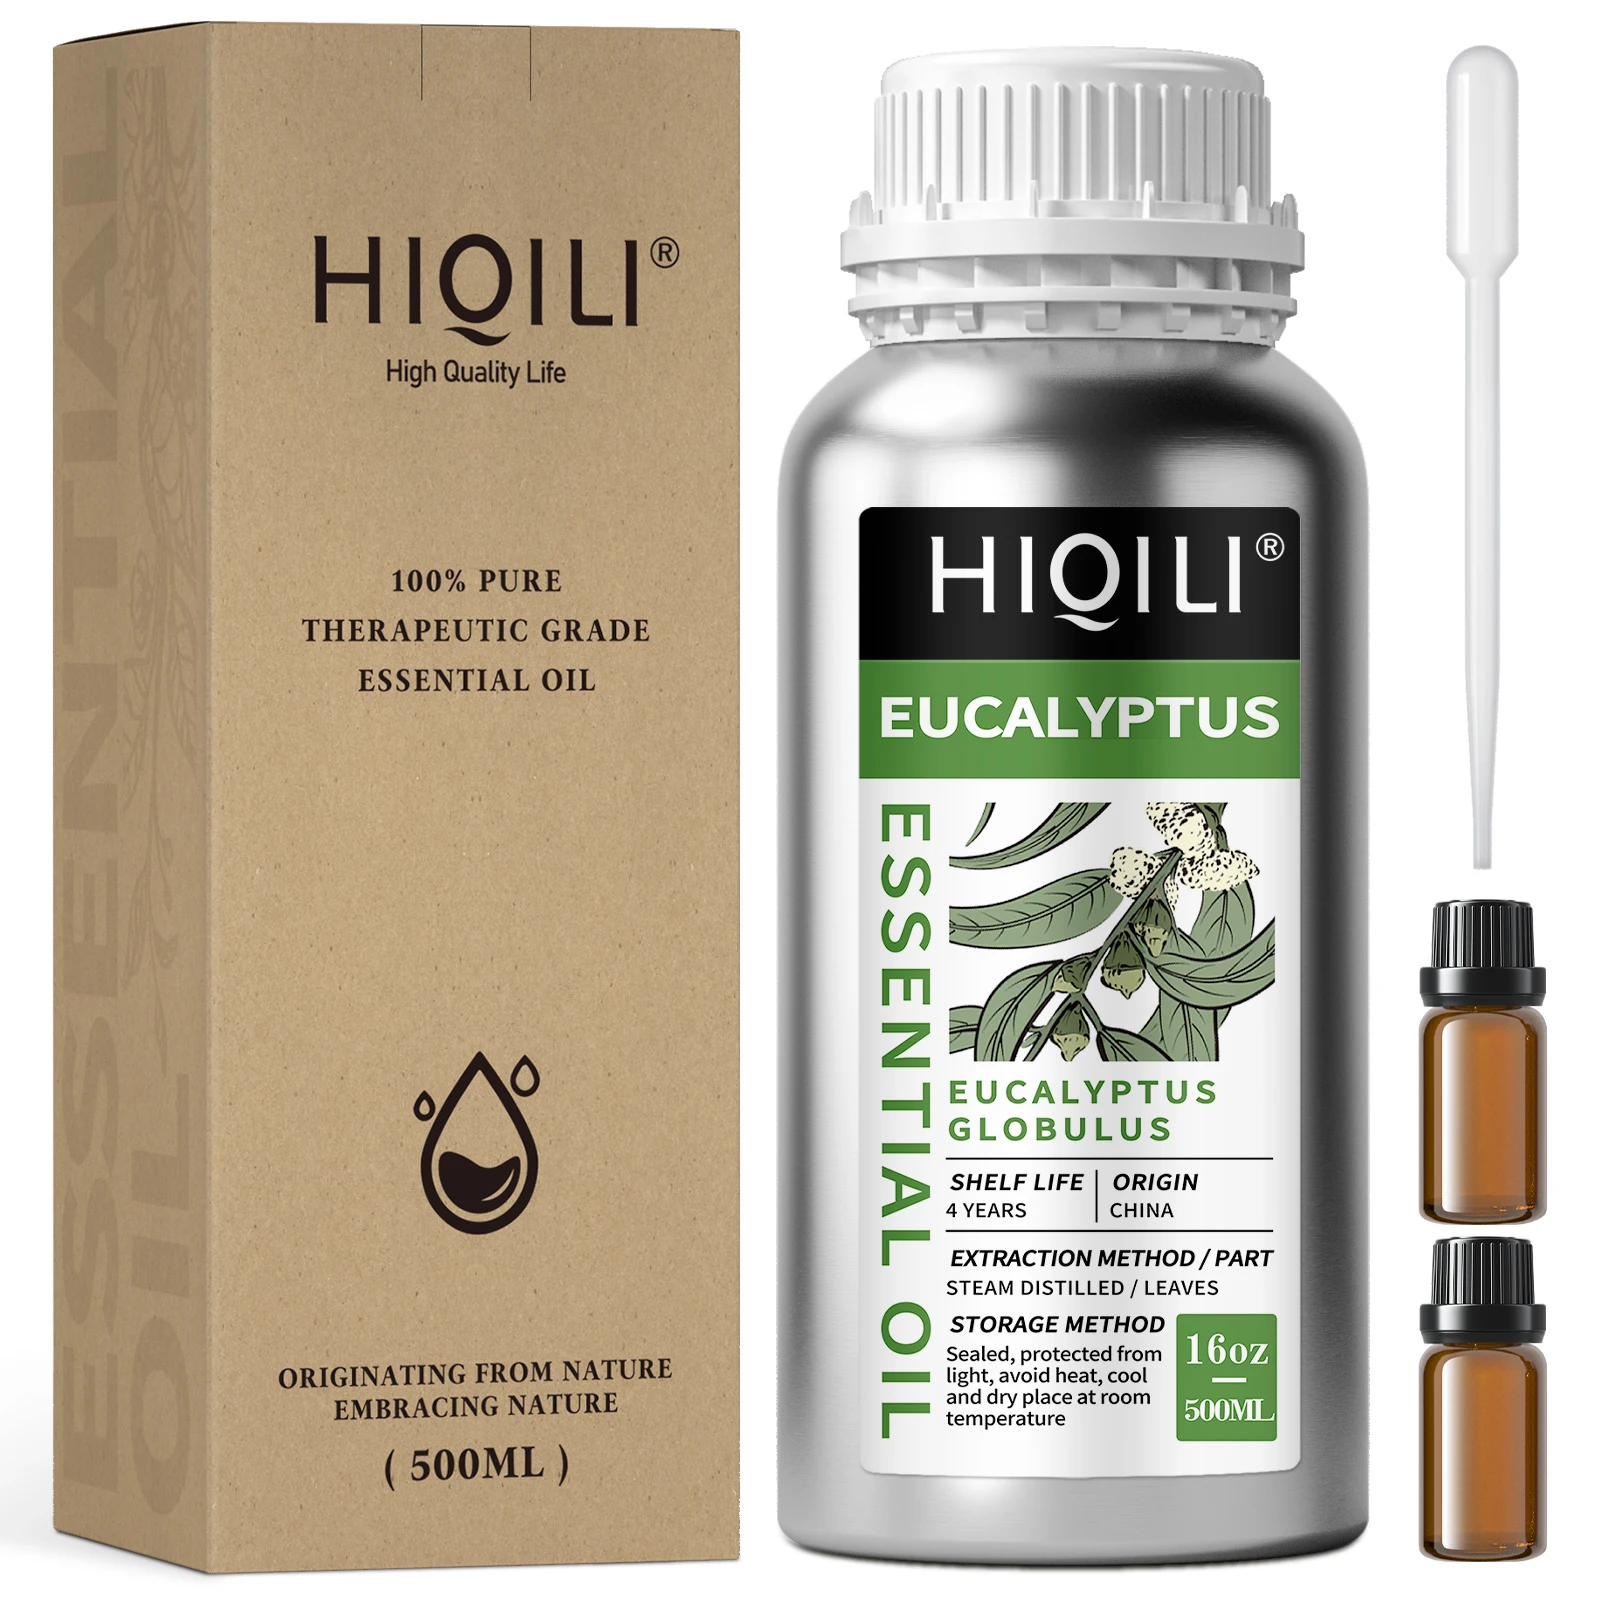 hiqili-500ml-eucalyptus-essential-oils-100-pure-nature-for-aromatherapy-used-for-diffuser-humidifier-massage-prevent-colds